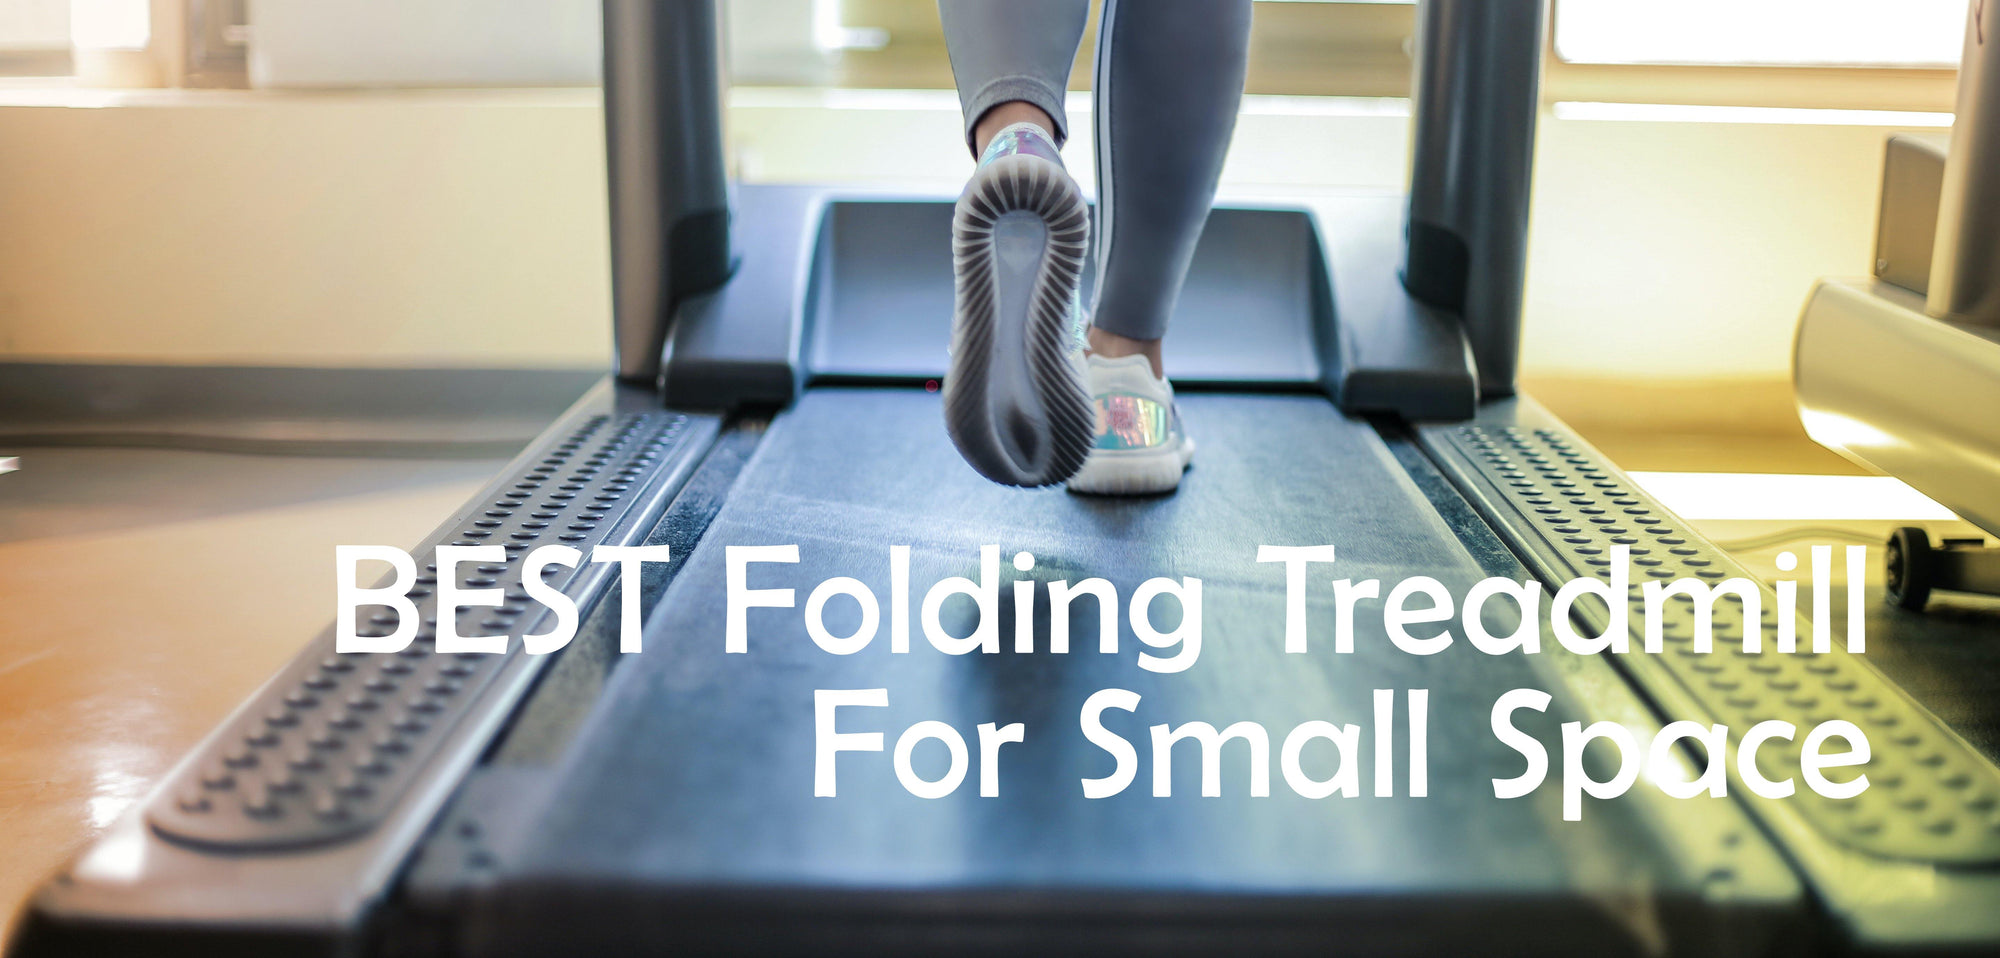 Best Folding Treadmill For Small Space - WalkingPad R1 Pro - TOV Collection